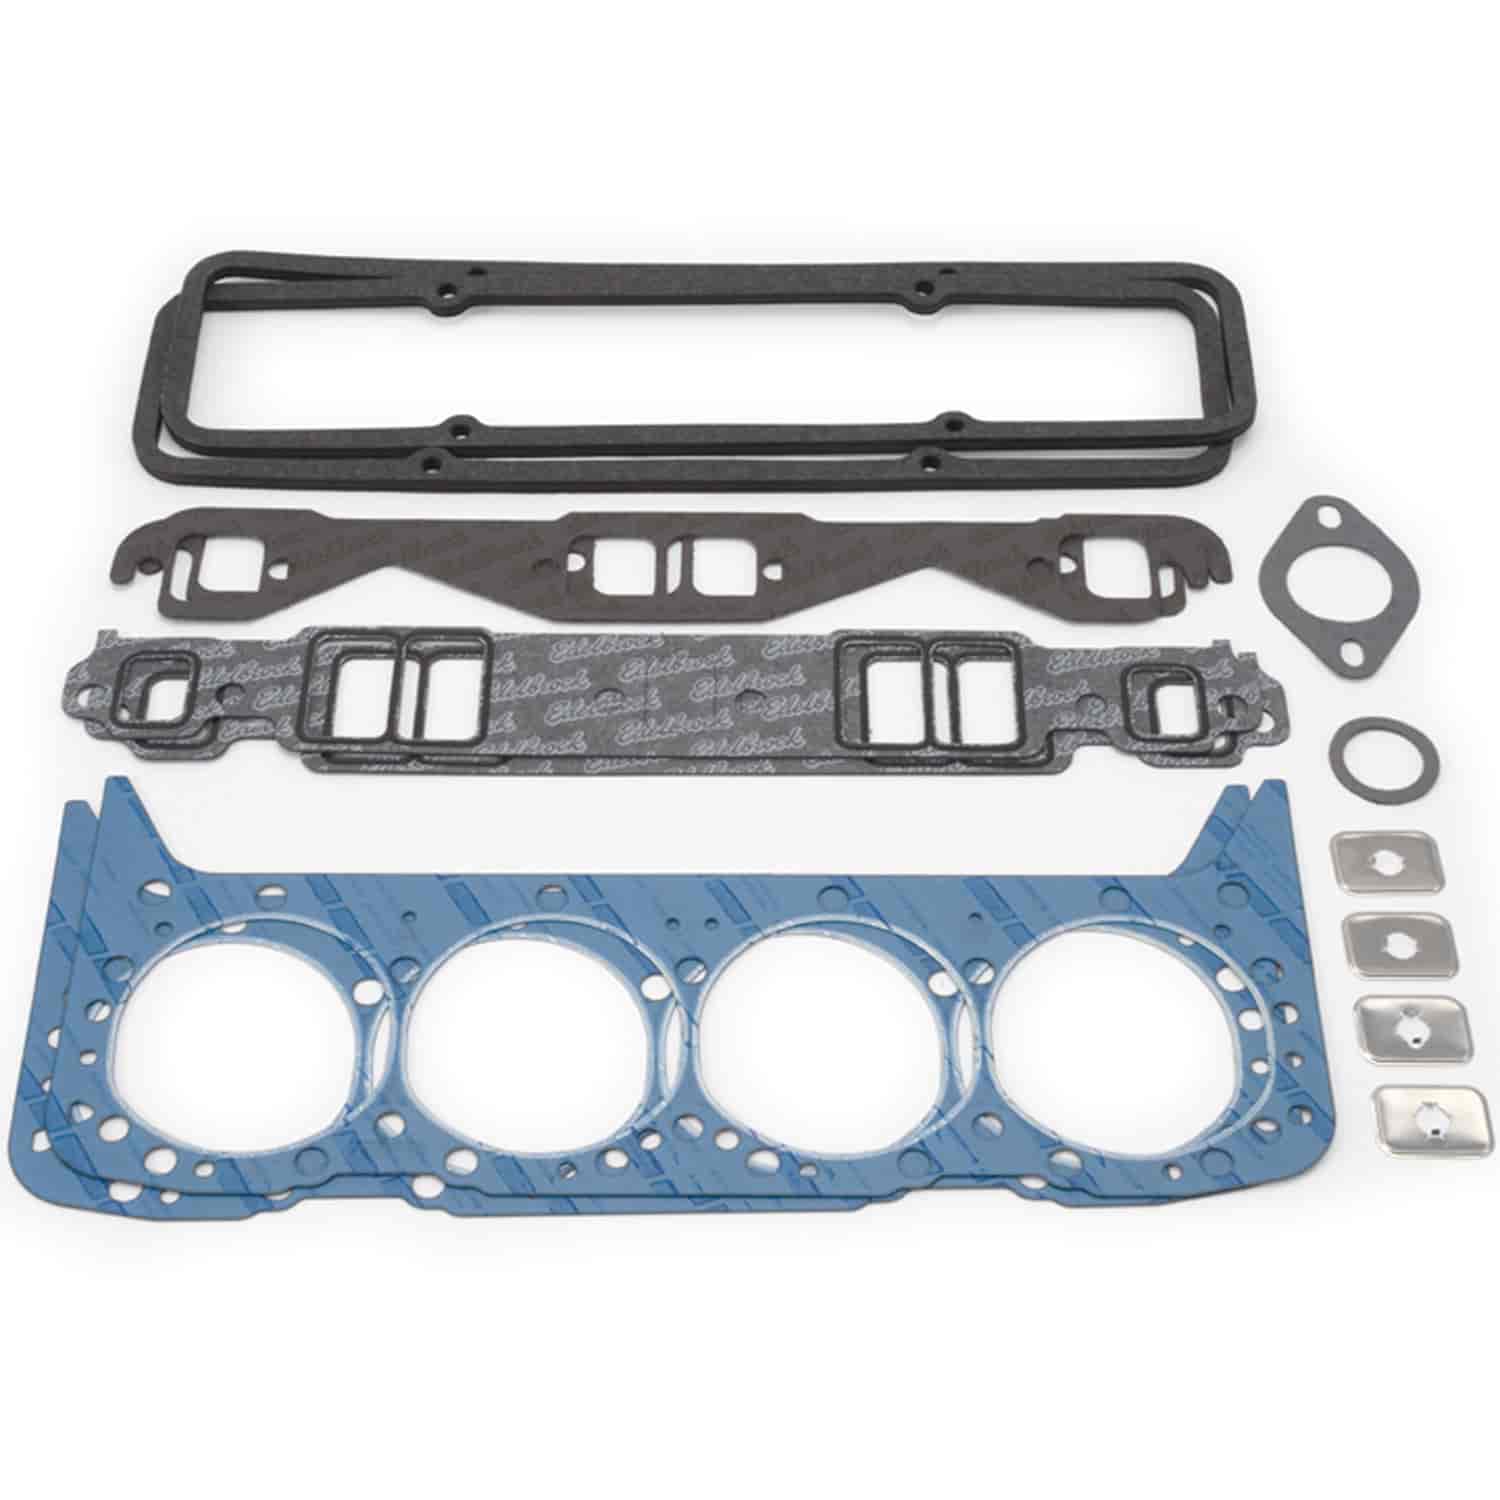 Complete Head Gaskets Set for Small Block Chevy